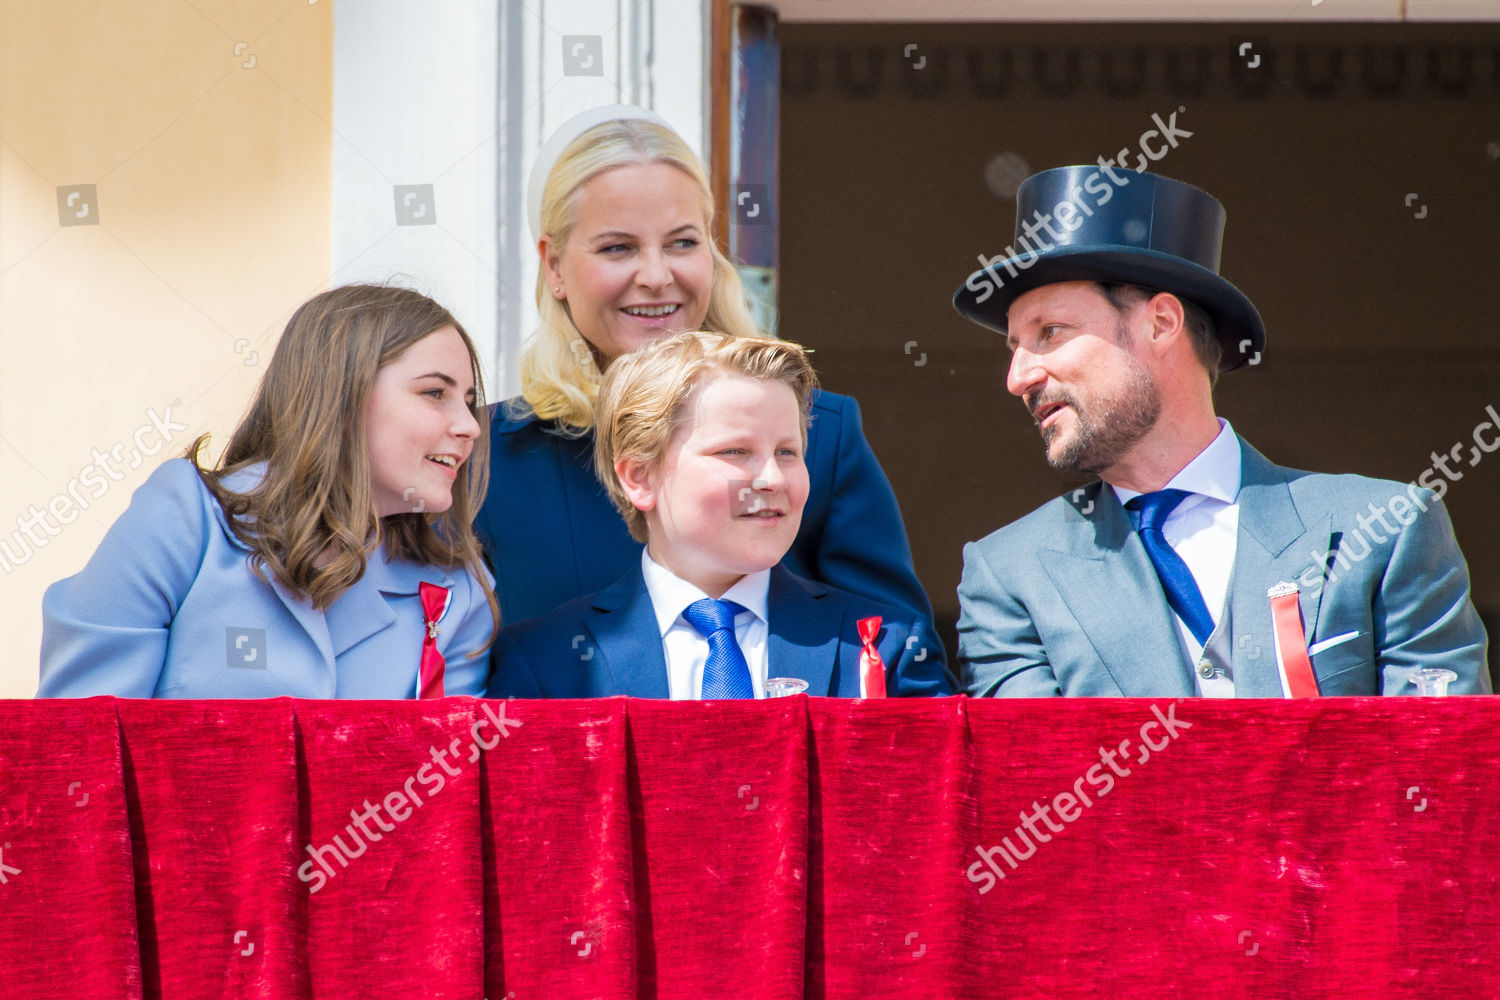 national-day-celebrations-the-royal-palace-oslo-norway-shutterstock-editorial-10239768j.jpg